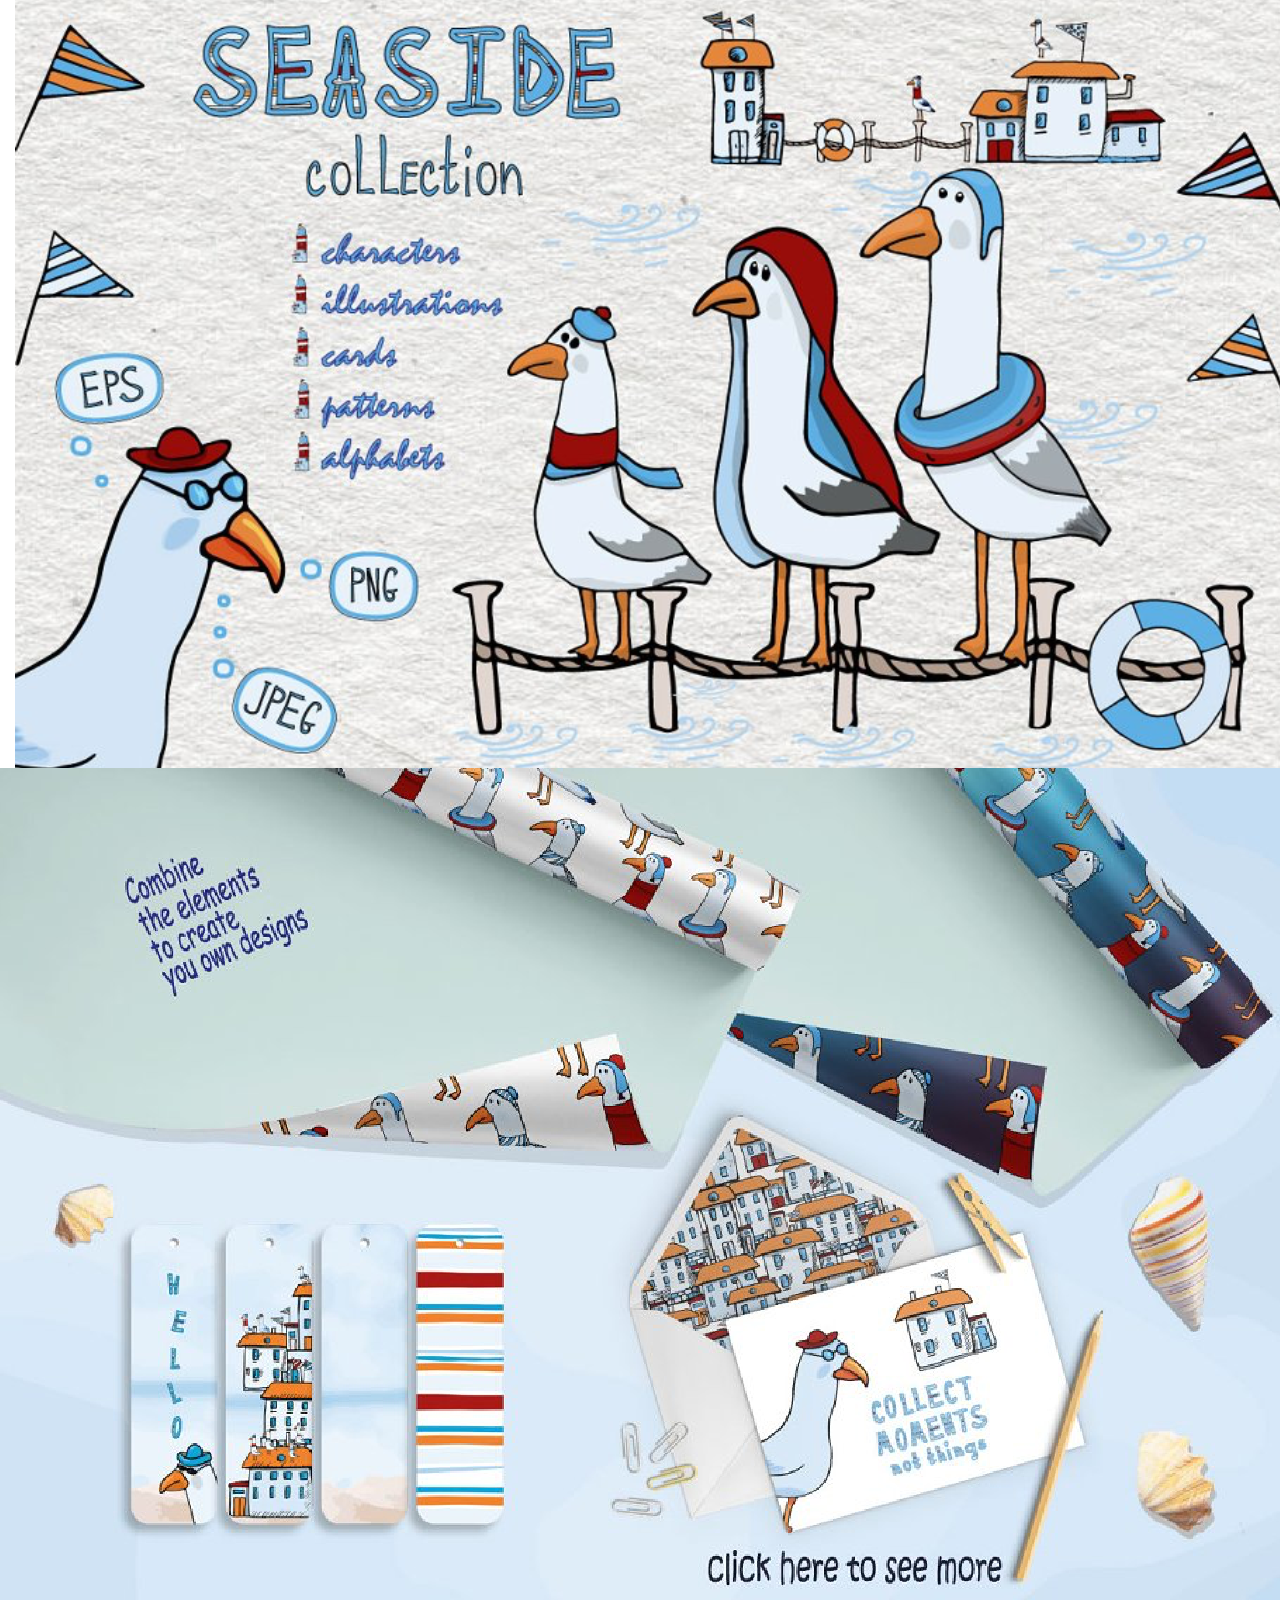 Seaside collection pinterest image preview.